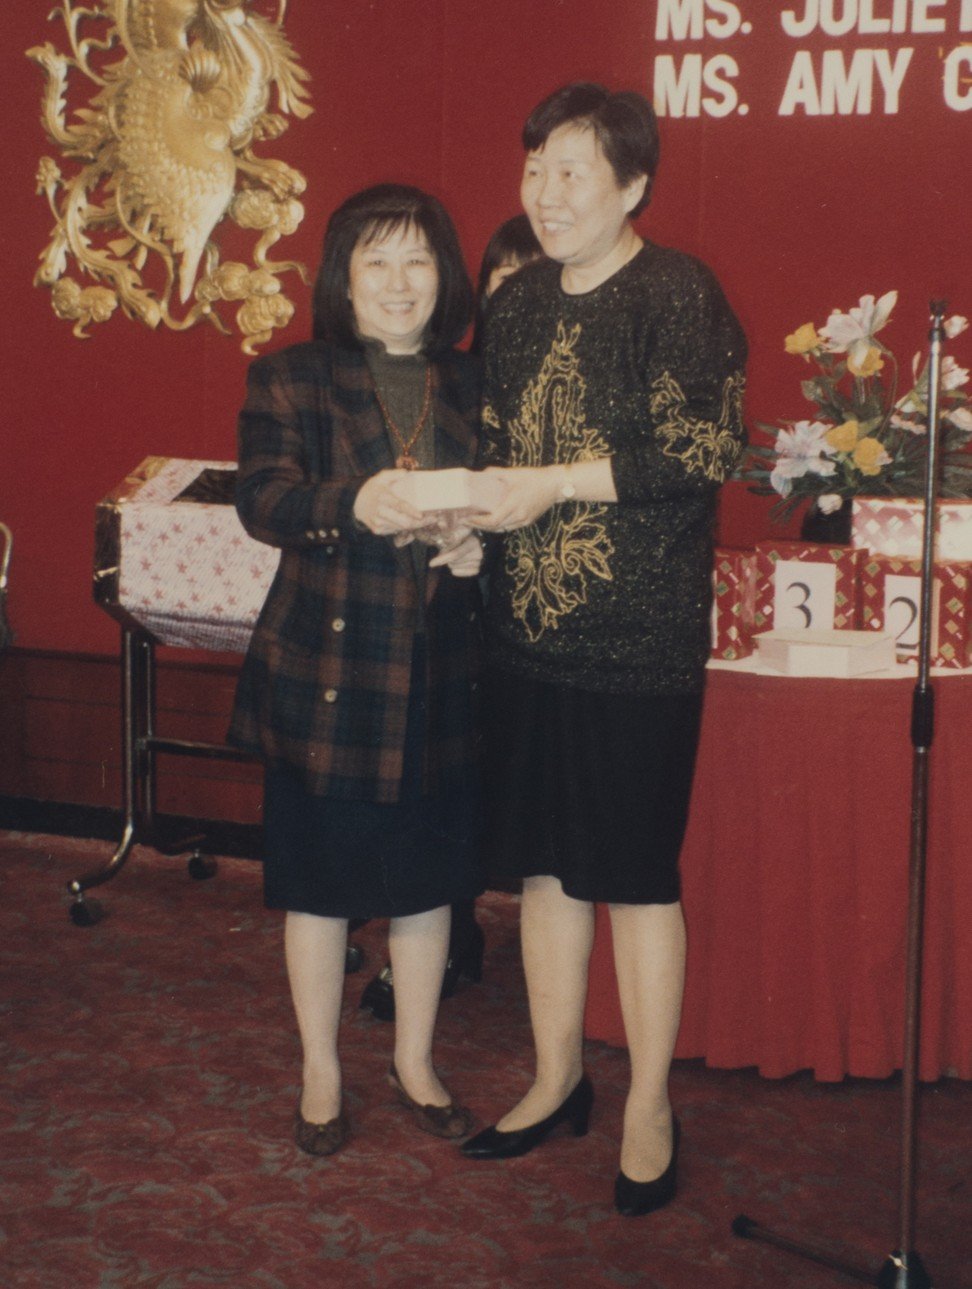 Juliet Feng Yee-hsin (left) and Ivy Chow Chui-ying in a photo from circa 1975. Photo: courtesy of Juliet Feng Yee-hsin and Ivy Chow Chui-ying